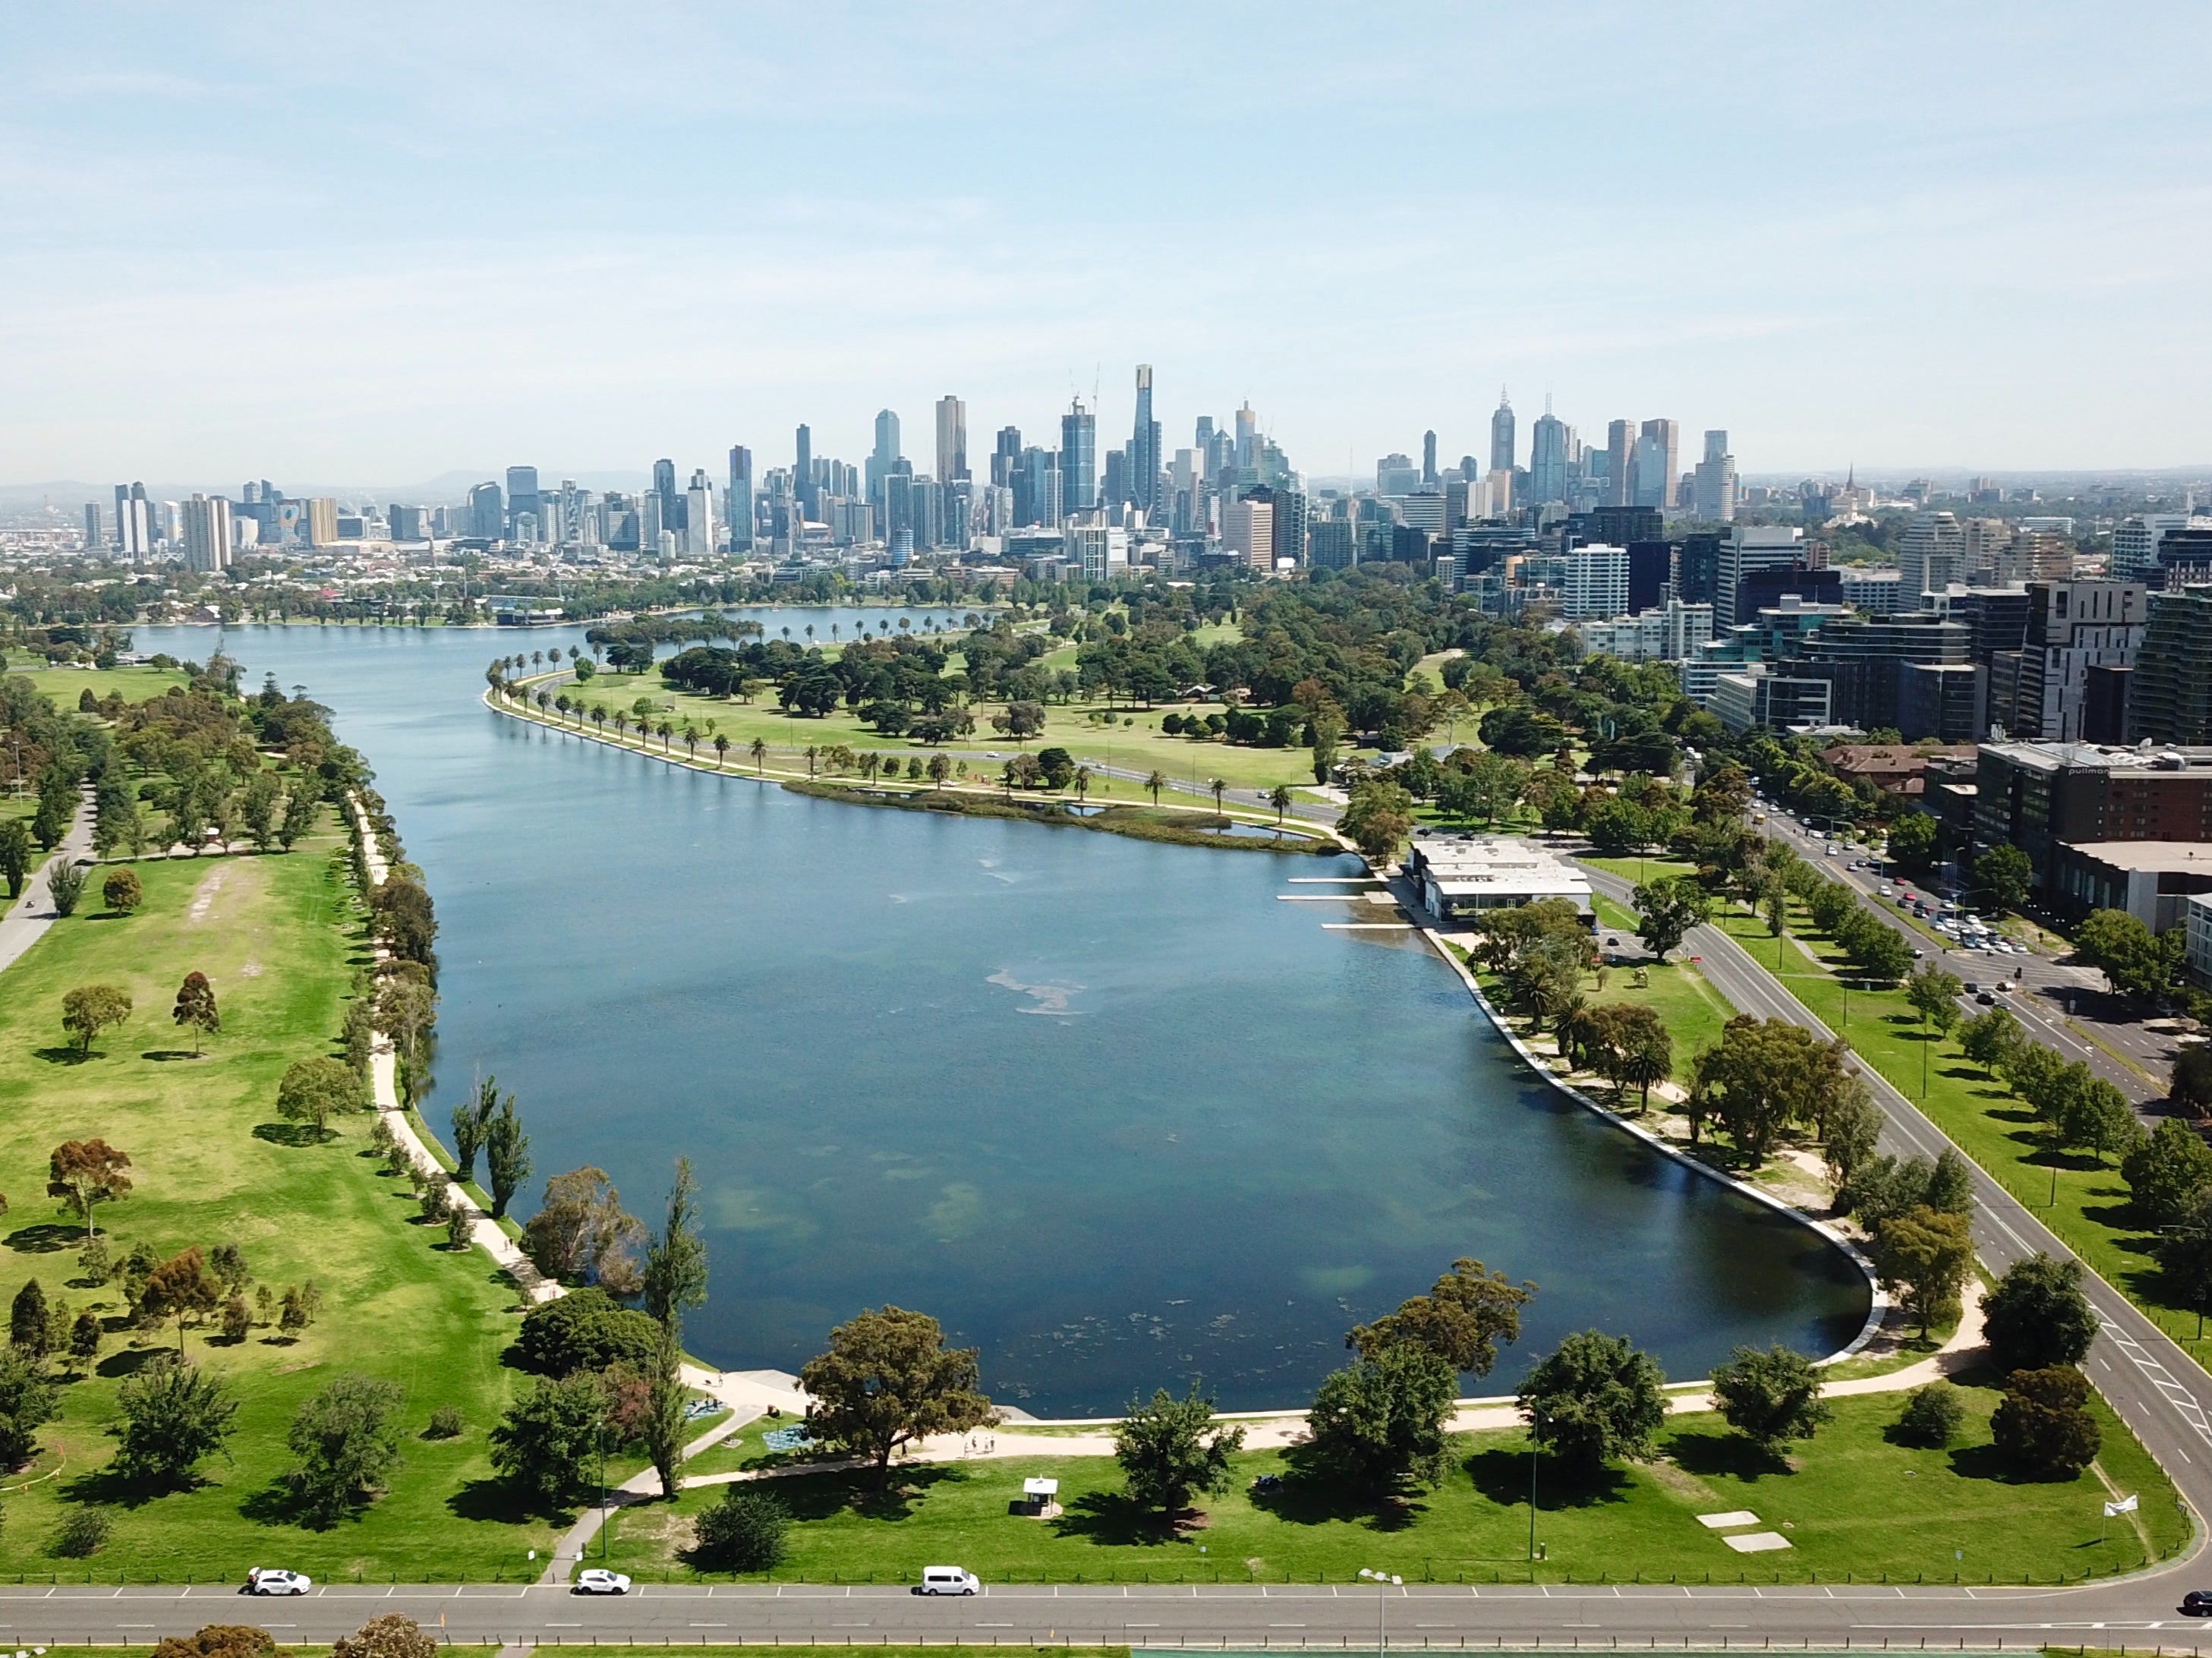 Albert Park in Melbourne will host the first race of the 2025 F1 season